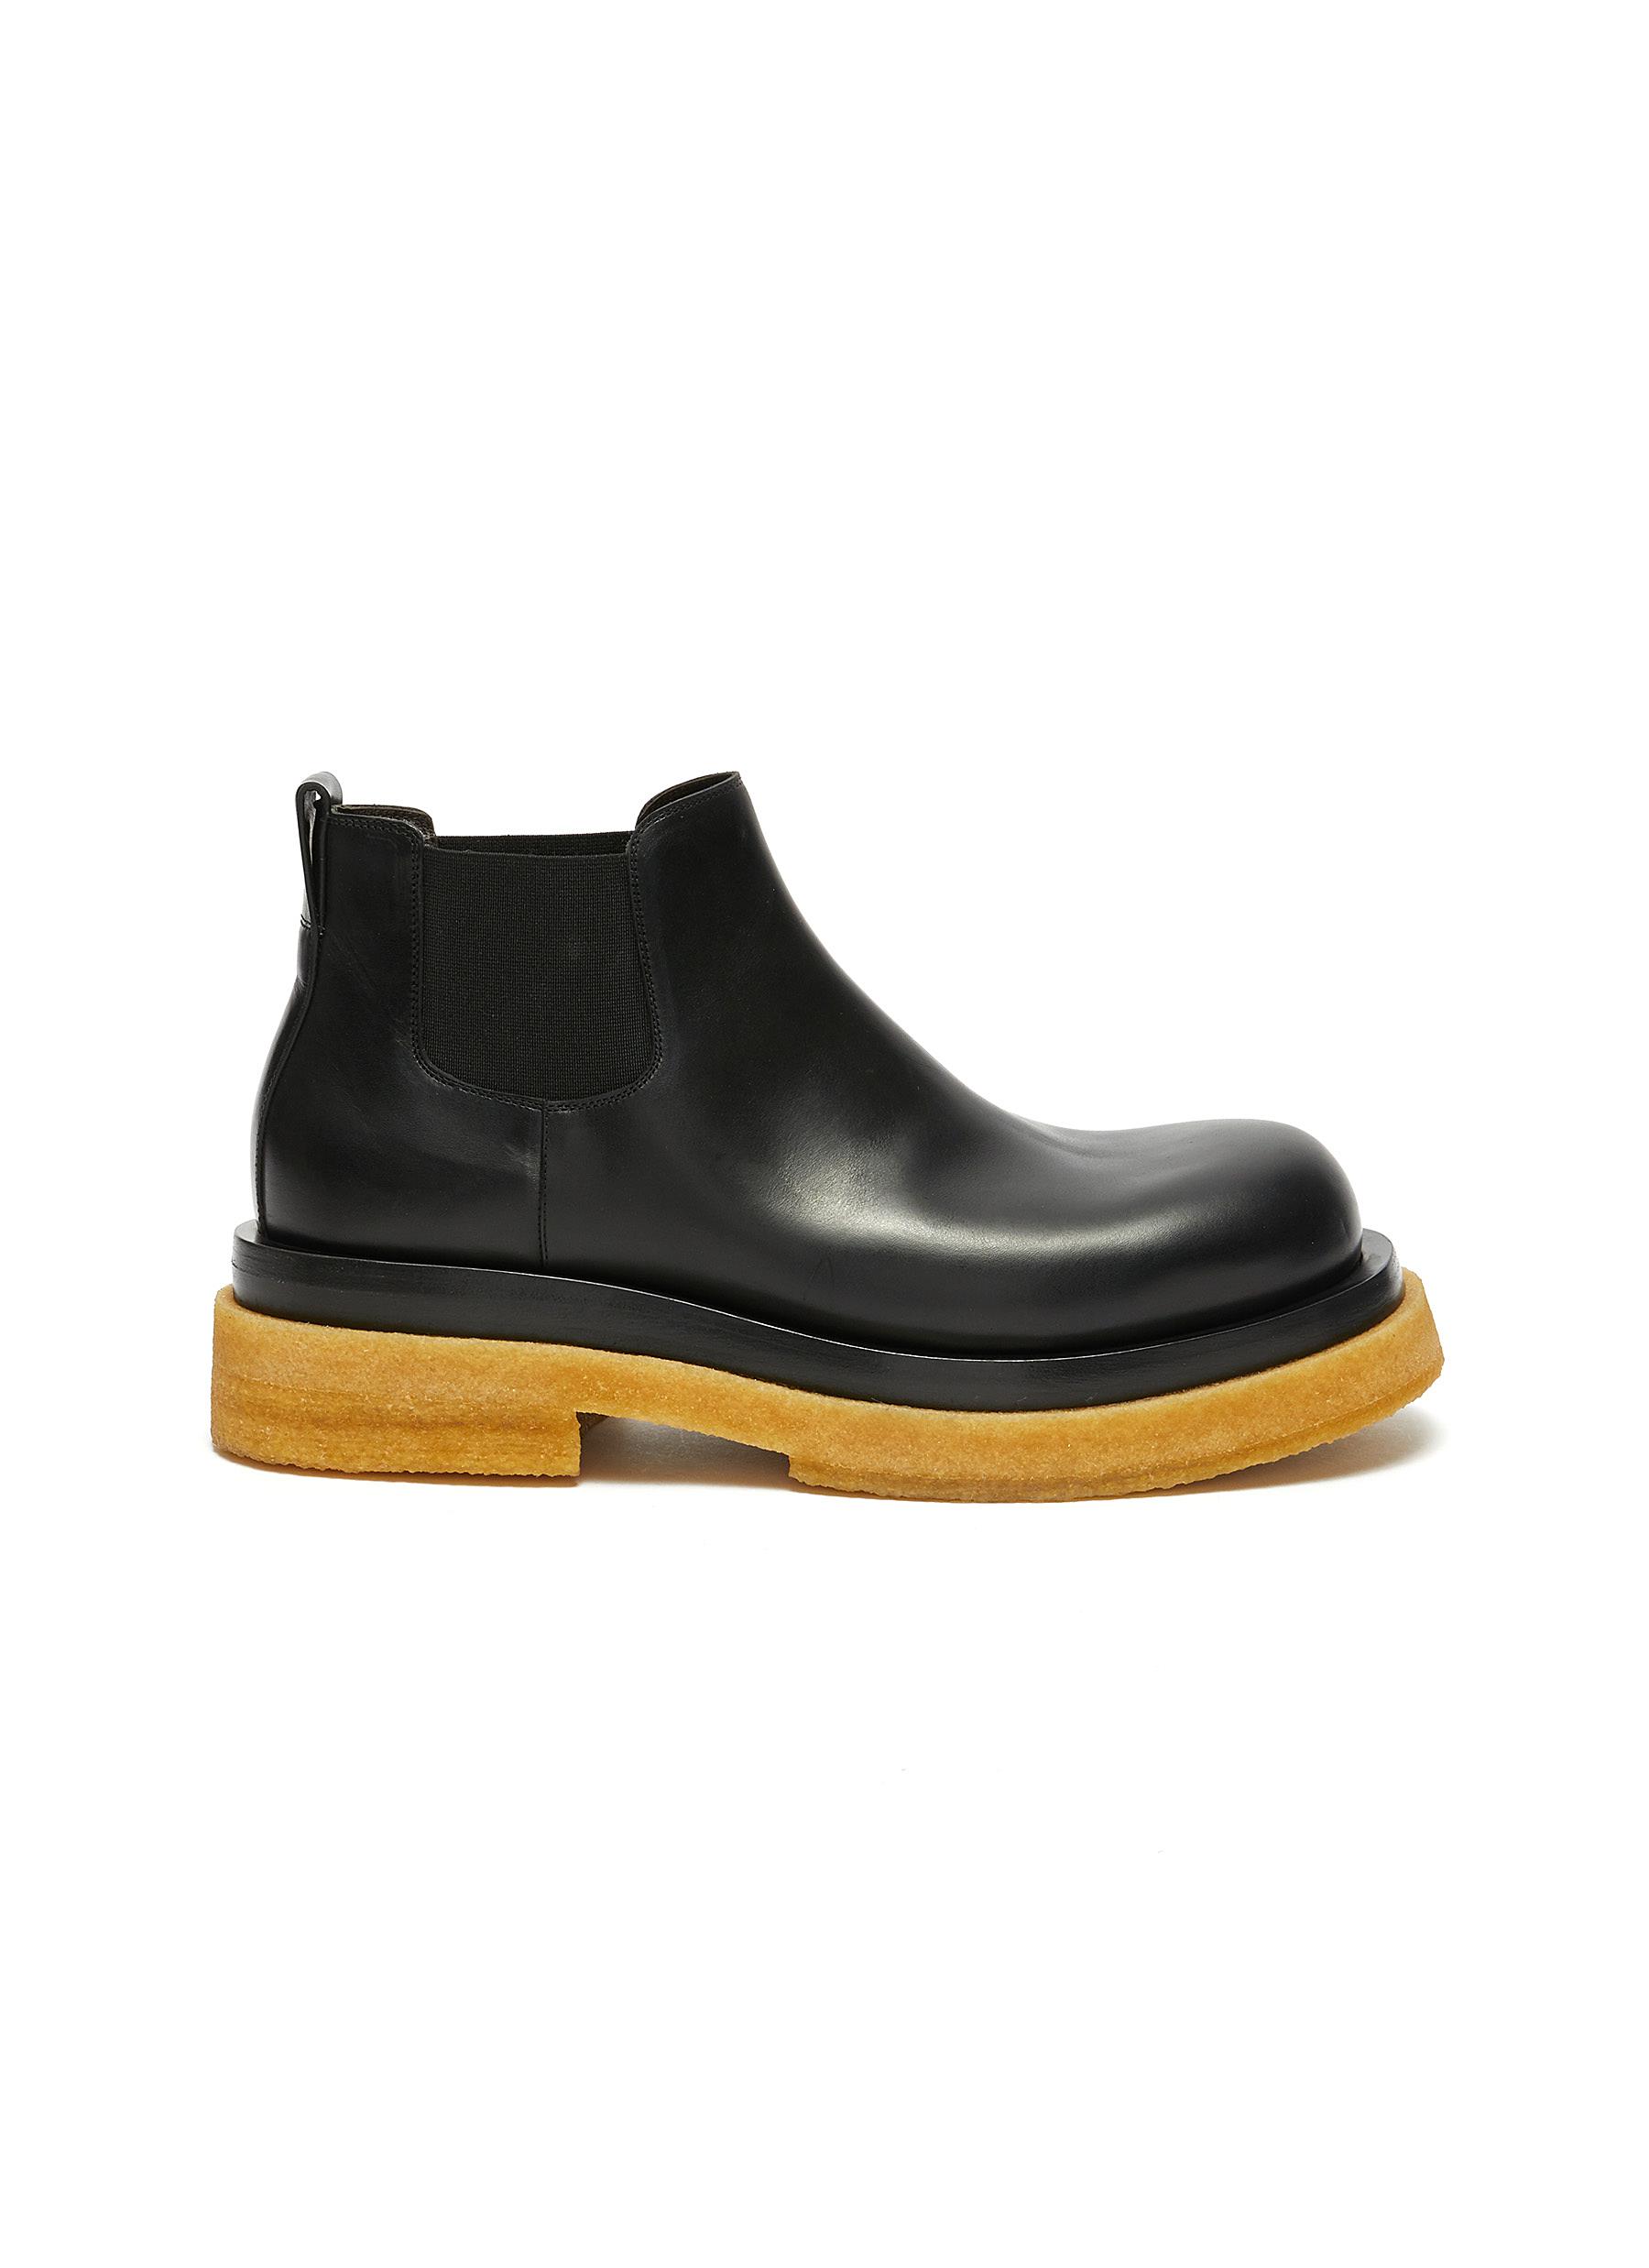 Crepe Sole Leather Ankle Chelsea Boots